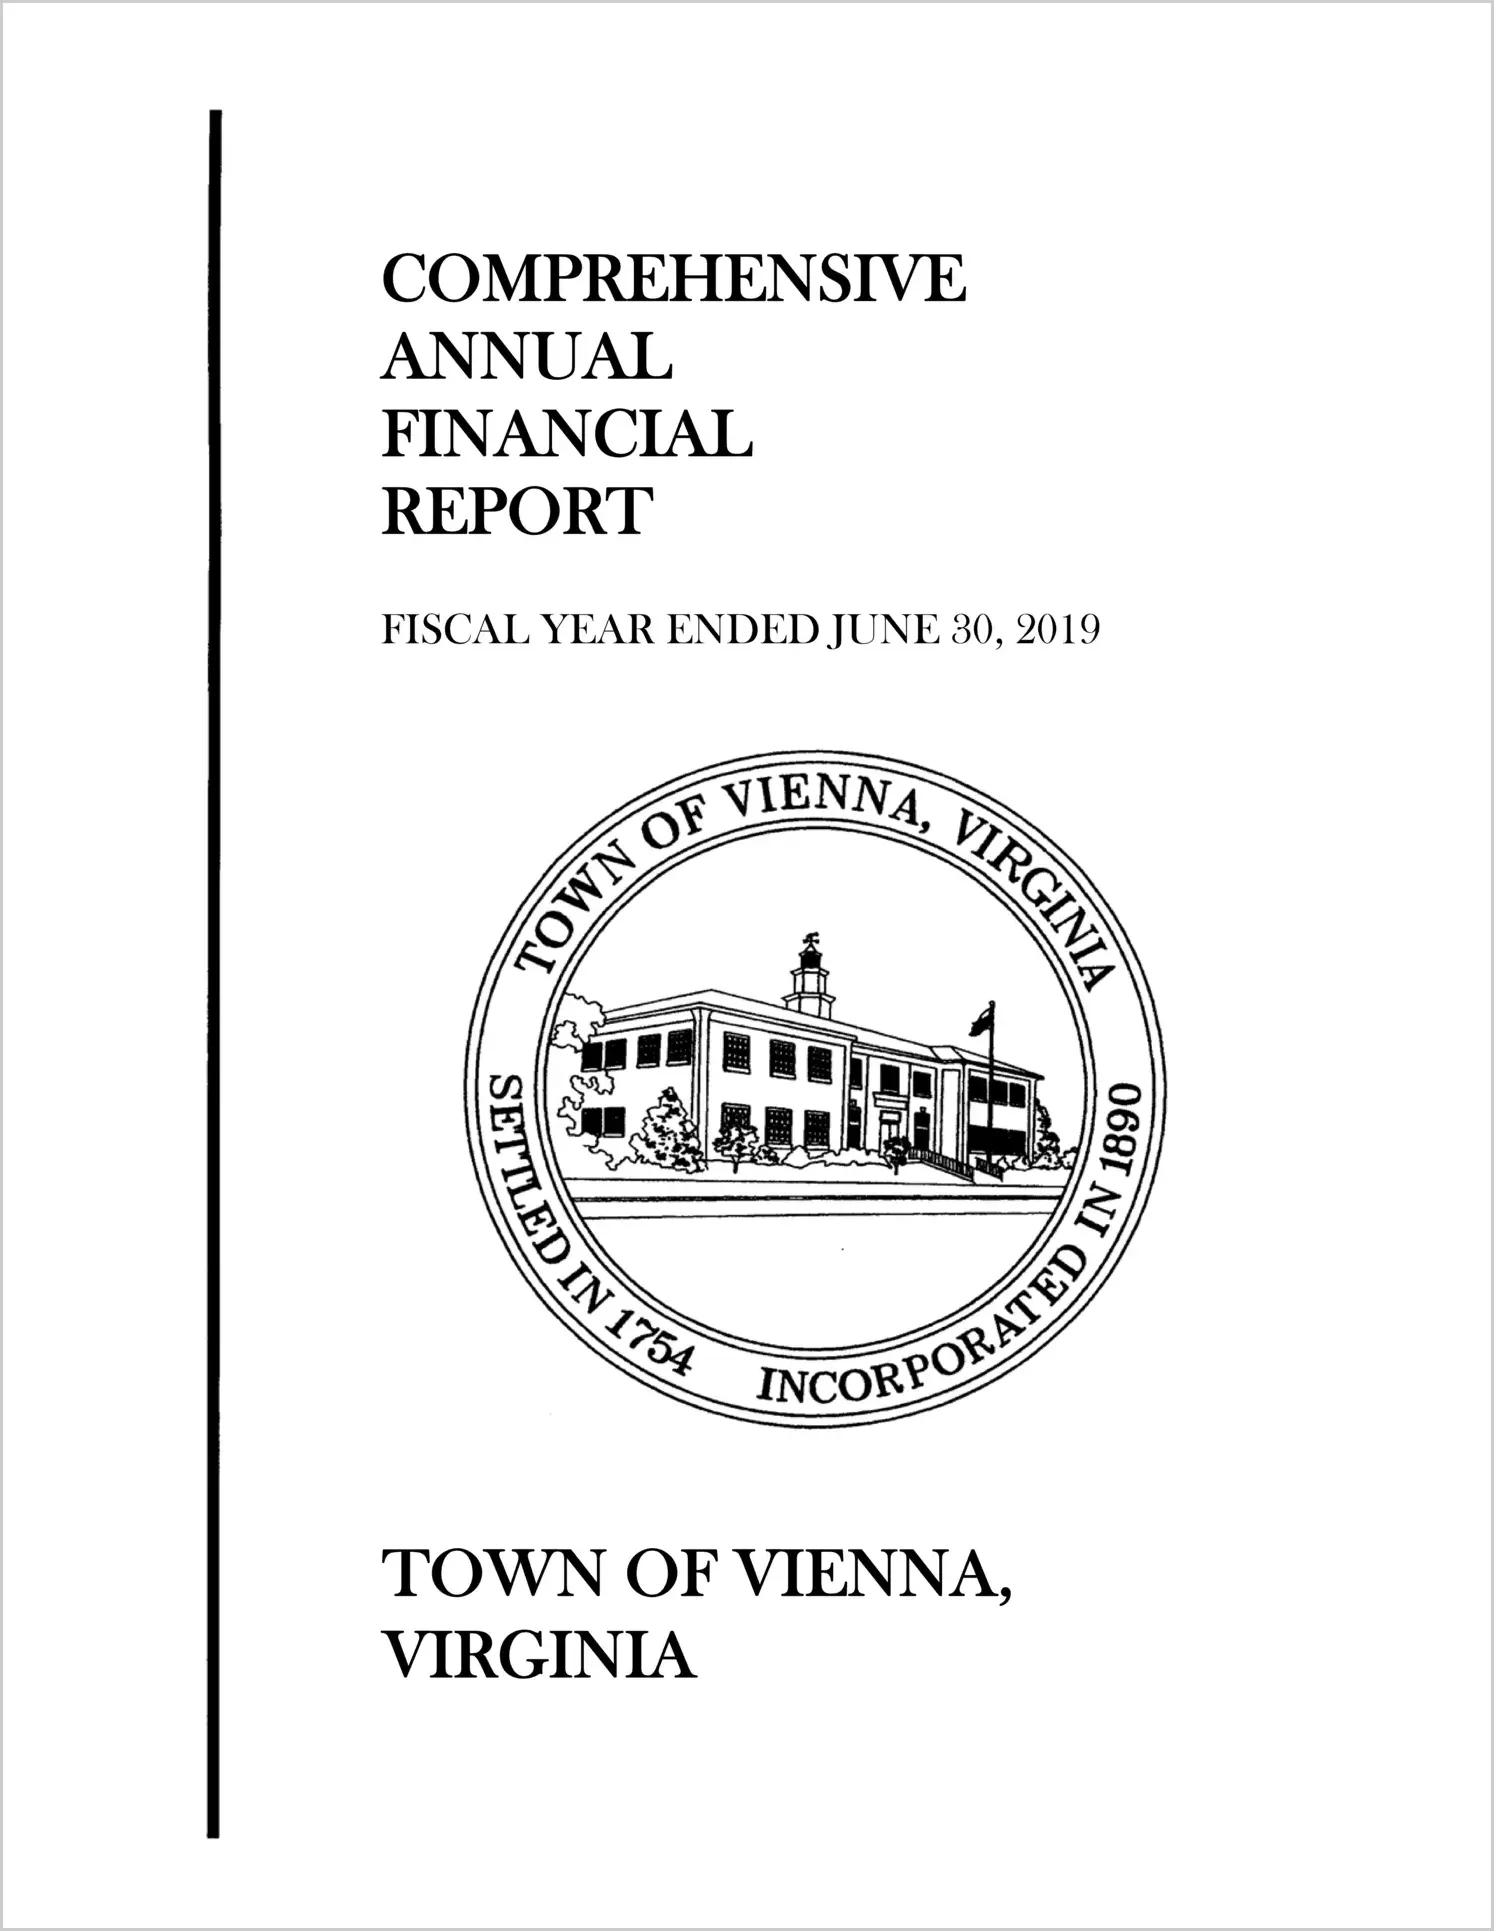 2019 Annual Financial Report for Town of Vienna